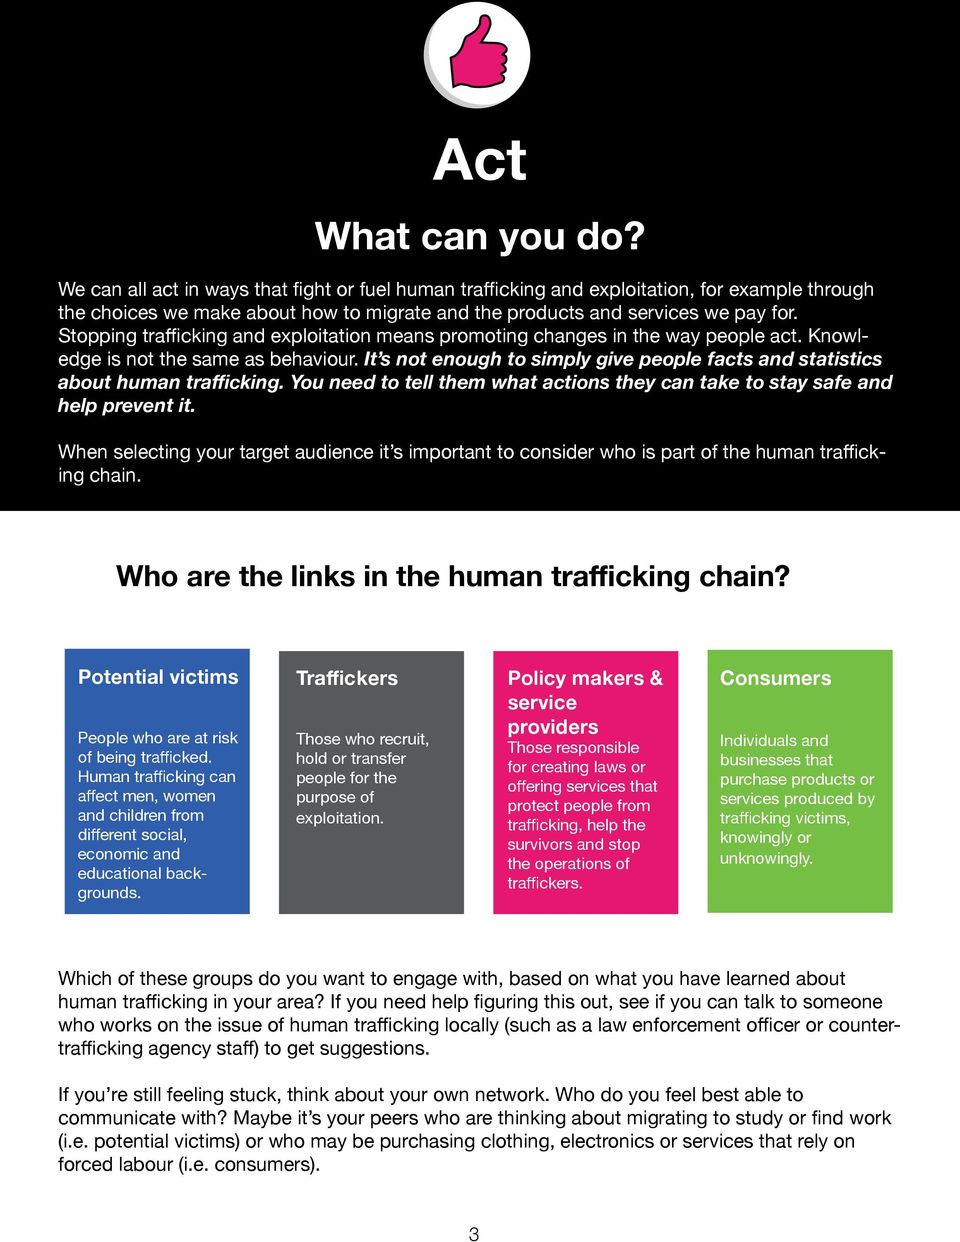 Stopping trafficking and exploitation means promoting changes in the way people act. Knowledge is not the same as behaviour.